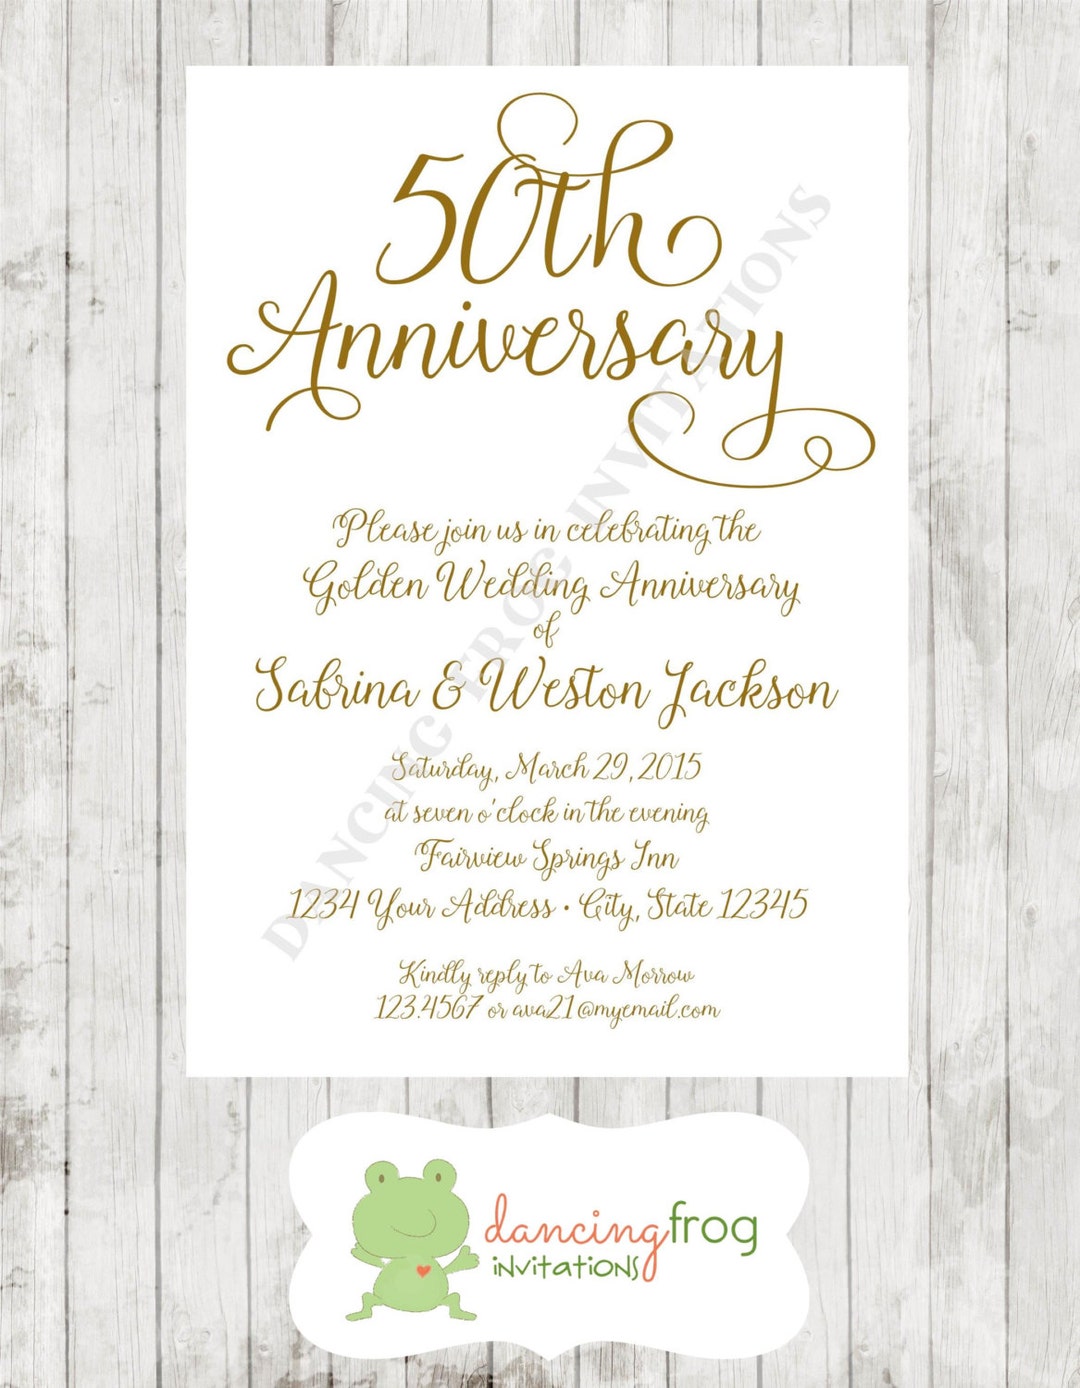 50 Pack Blank Invitations with Envelopes, Printable Kraft Cardstock Paper for Weddings, Birthday, Baby Shower (5x7)